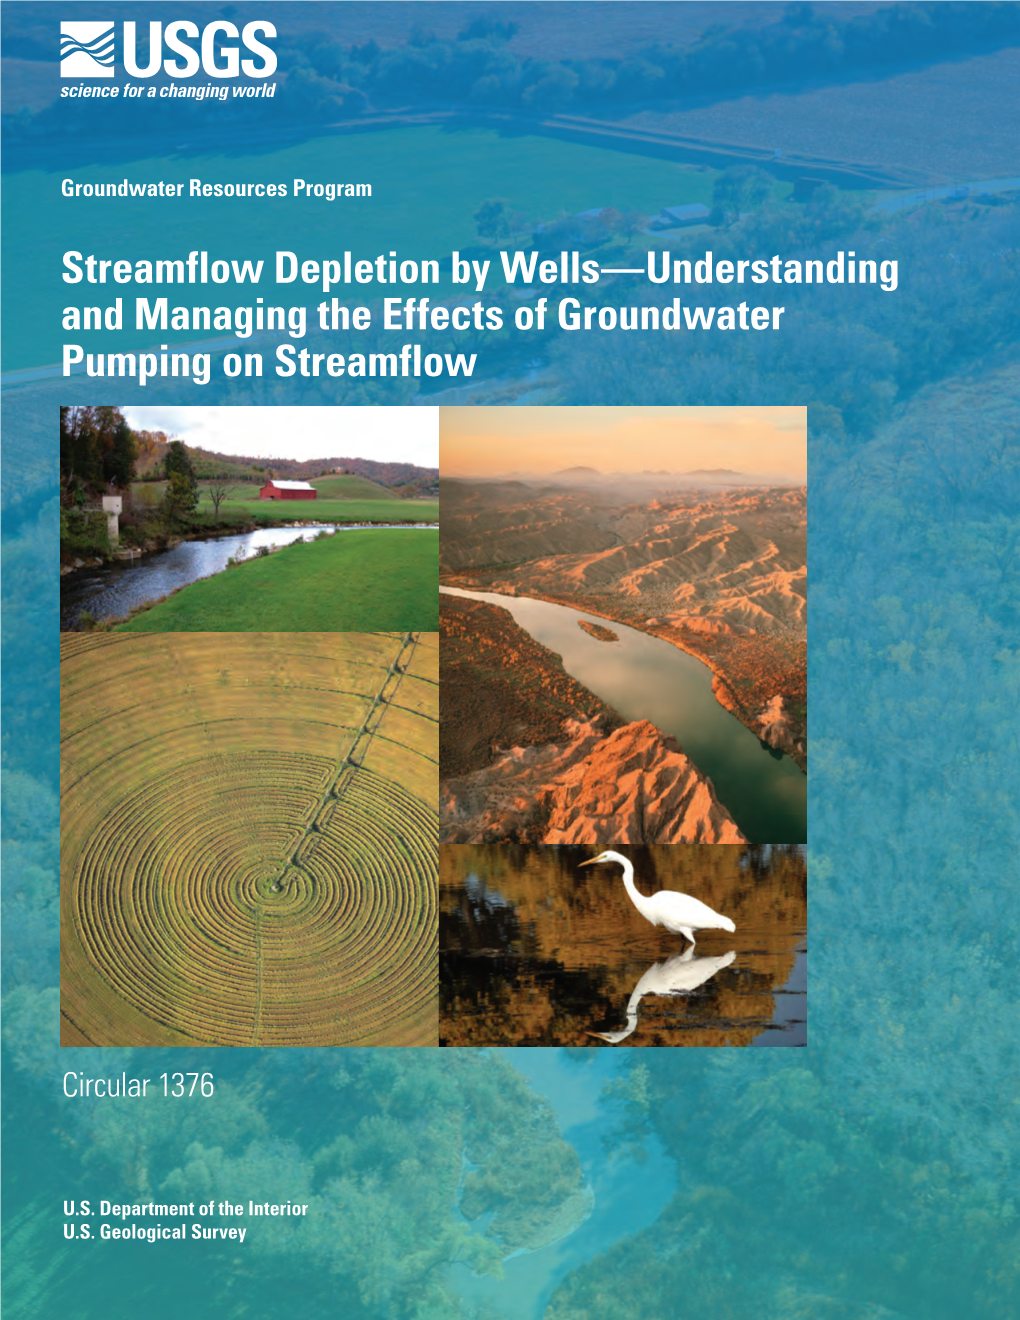 Streamflow Depletion by Wells—Understanding and Managing the Effects of Groundwater Pumping on Streamflow